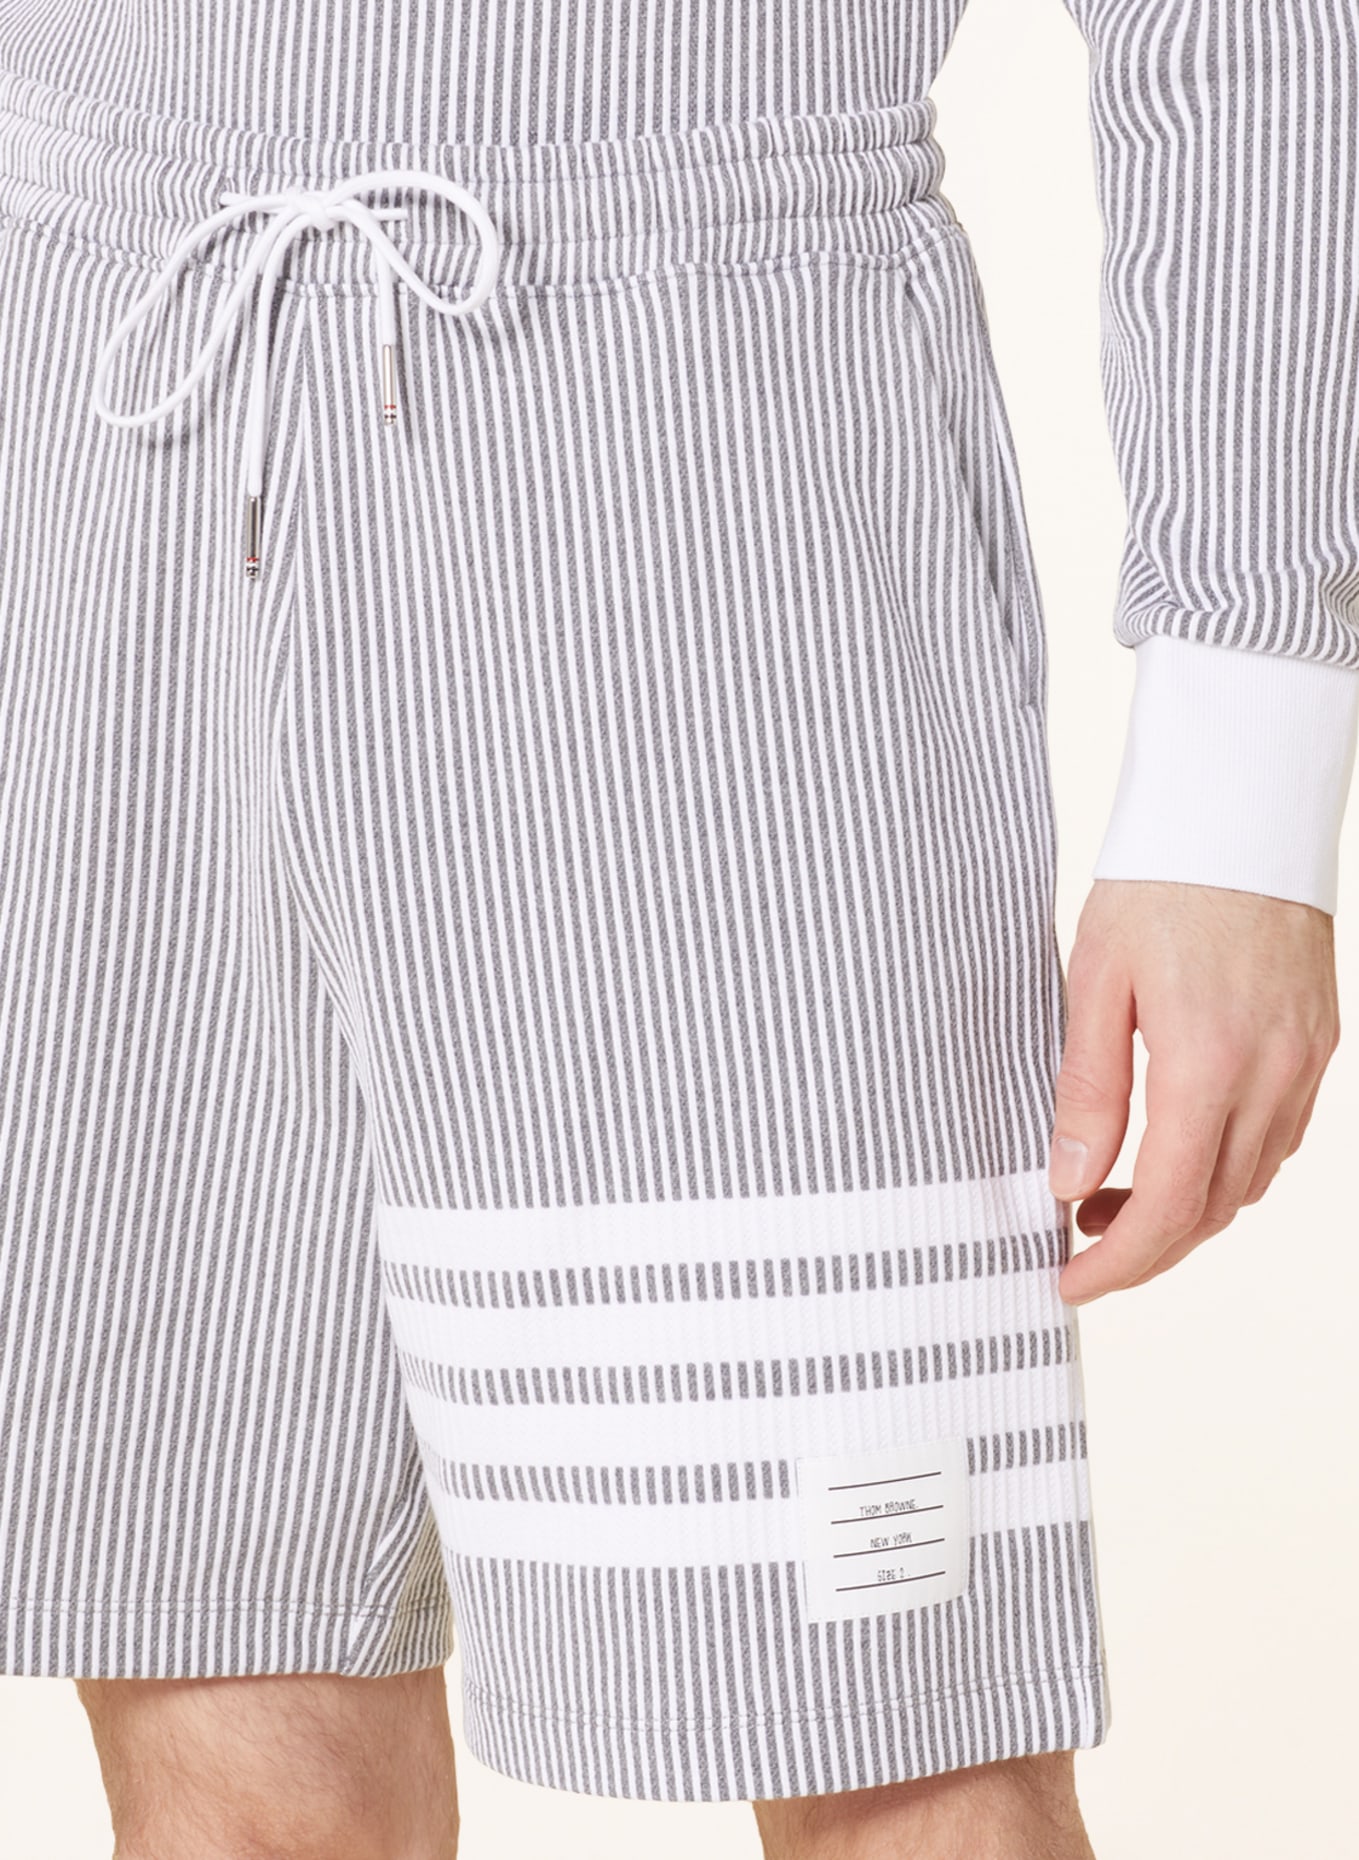 THOM BROWNE. Sweat shorts, Color: GRAY/ WHITE (Image 5)